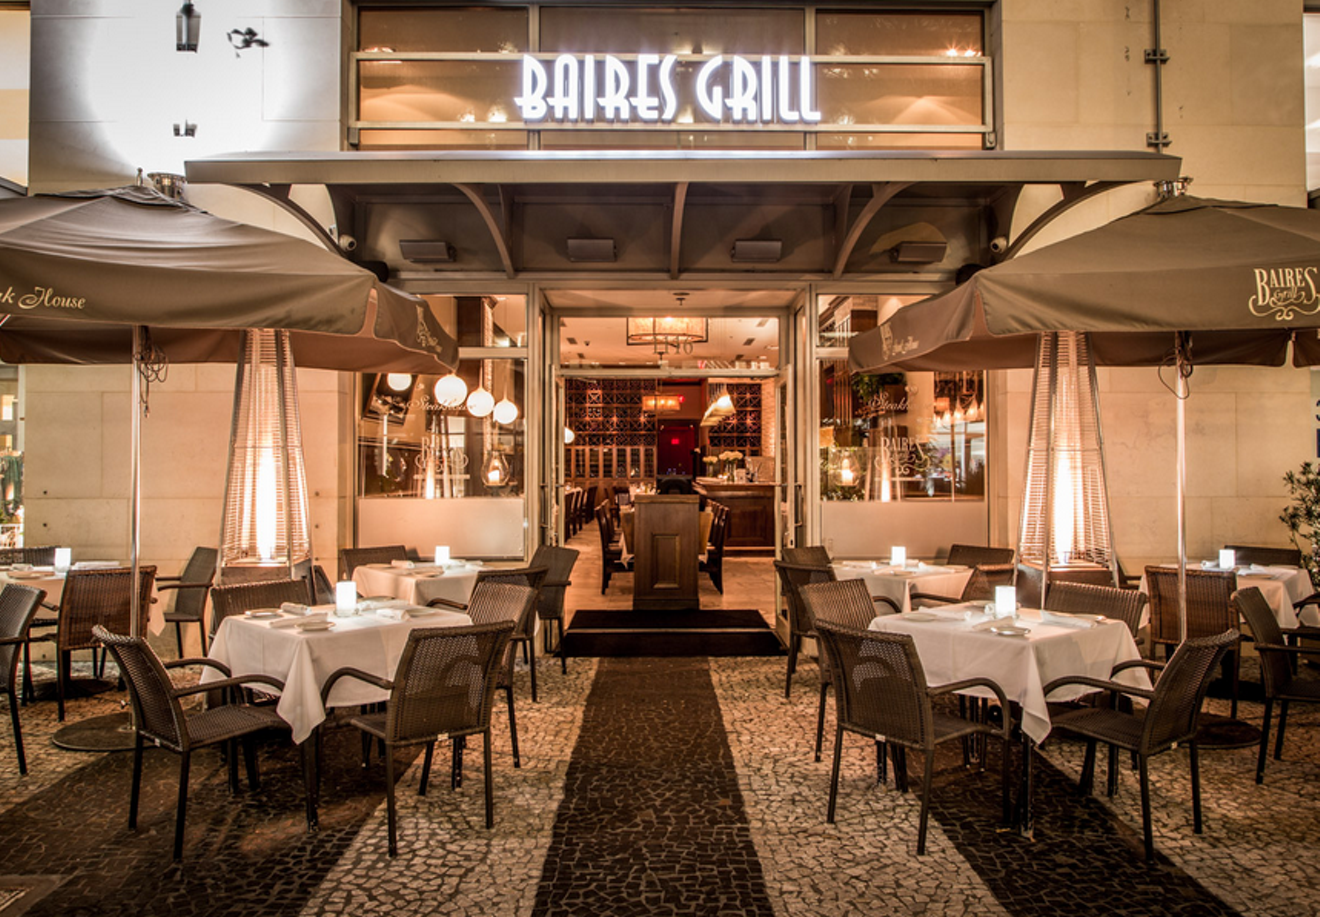 A Baires Grill dining room.